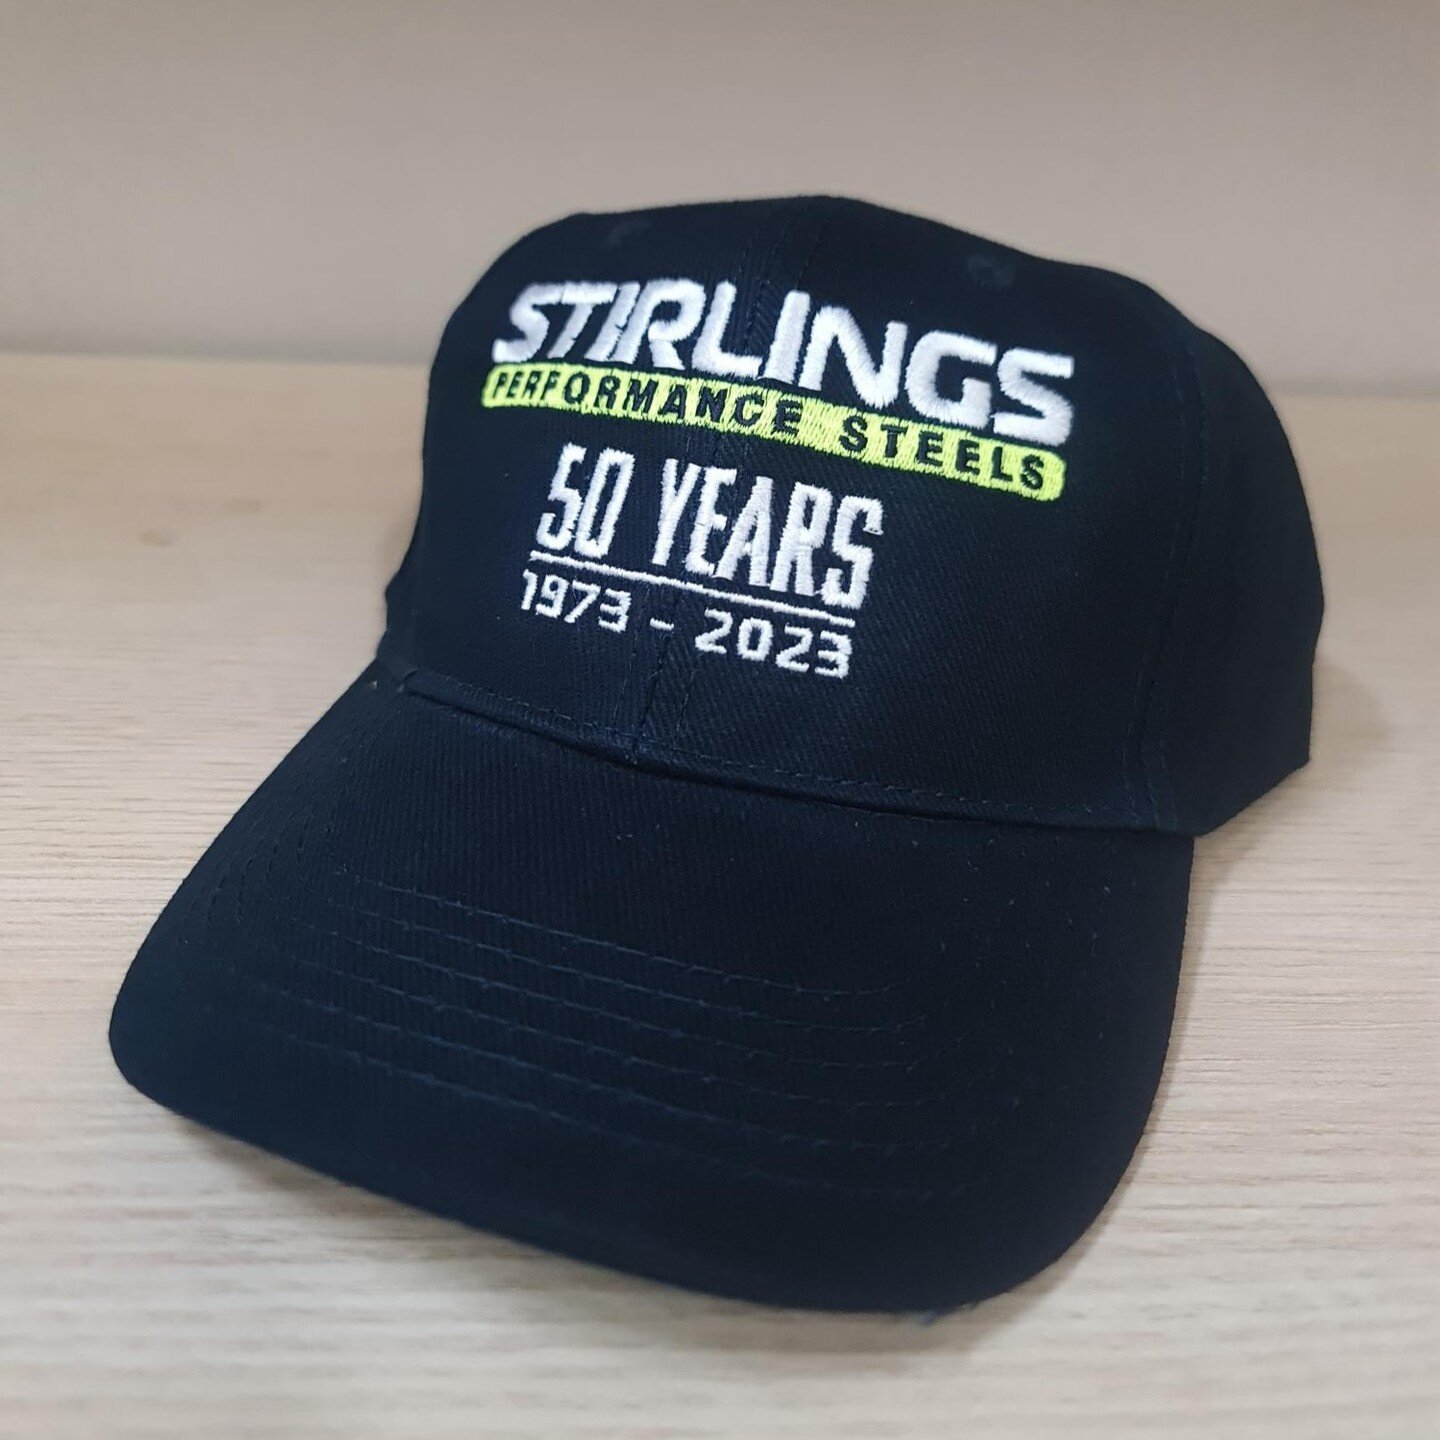 Protect yourself from the sun in style with our special edition 50 Years cap! Head over to your local Stirlings and see us - the service is just as great as the merch 🧢